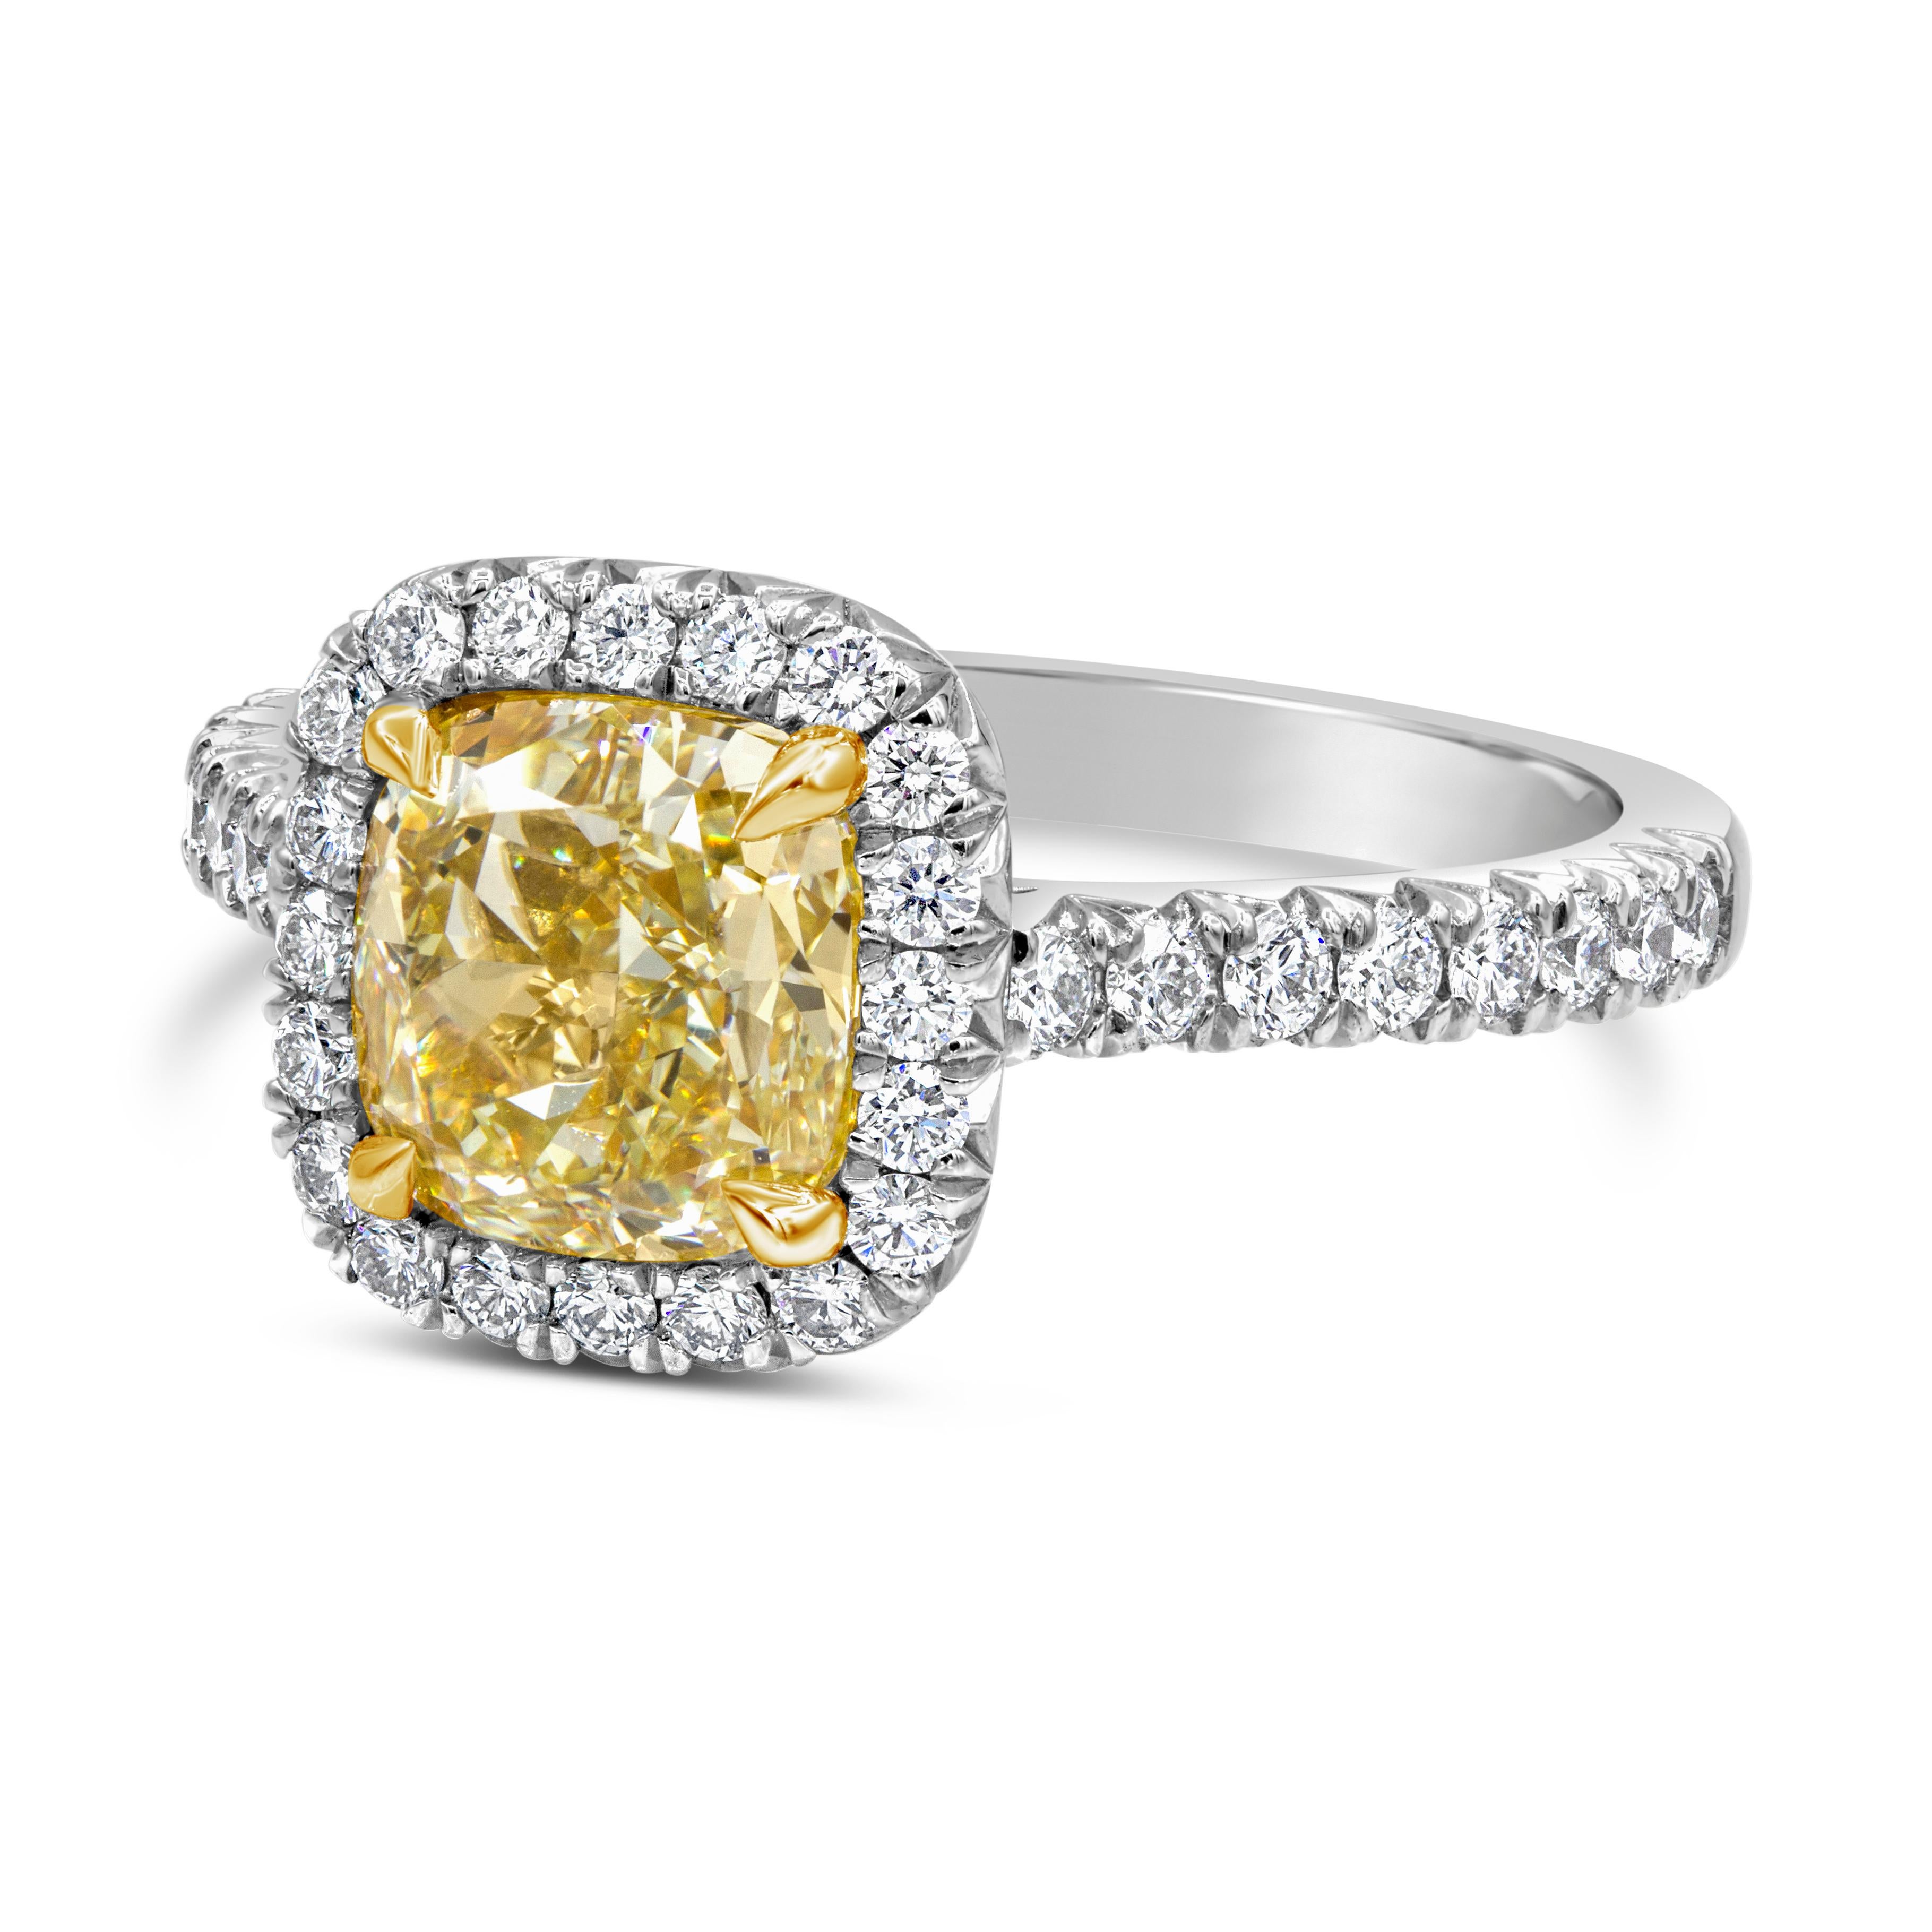 A halo engagement ring, featuring a 2.01 carats cushion cut diamond certified by GIA as Fancy Light Yellow color and VVS1 clarity set on a four prong setting made of 18K yellow gold. Accented by round brilliant cut diamonds that continue on to the